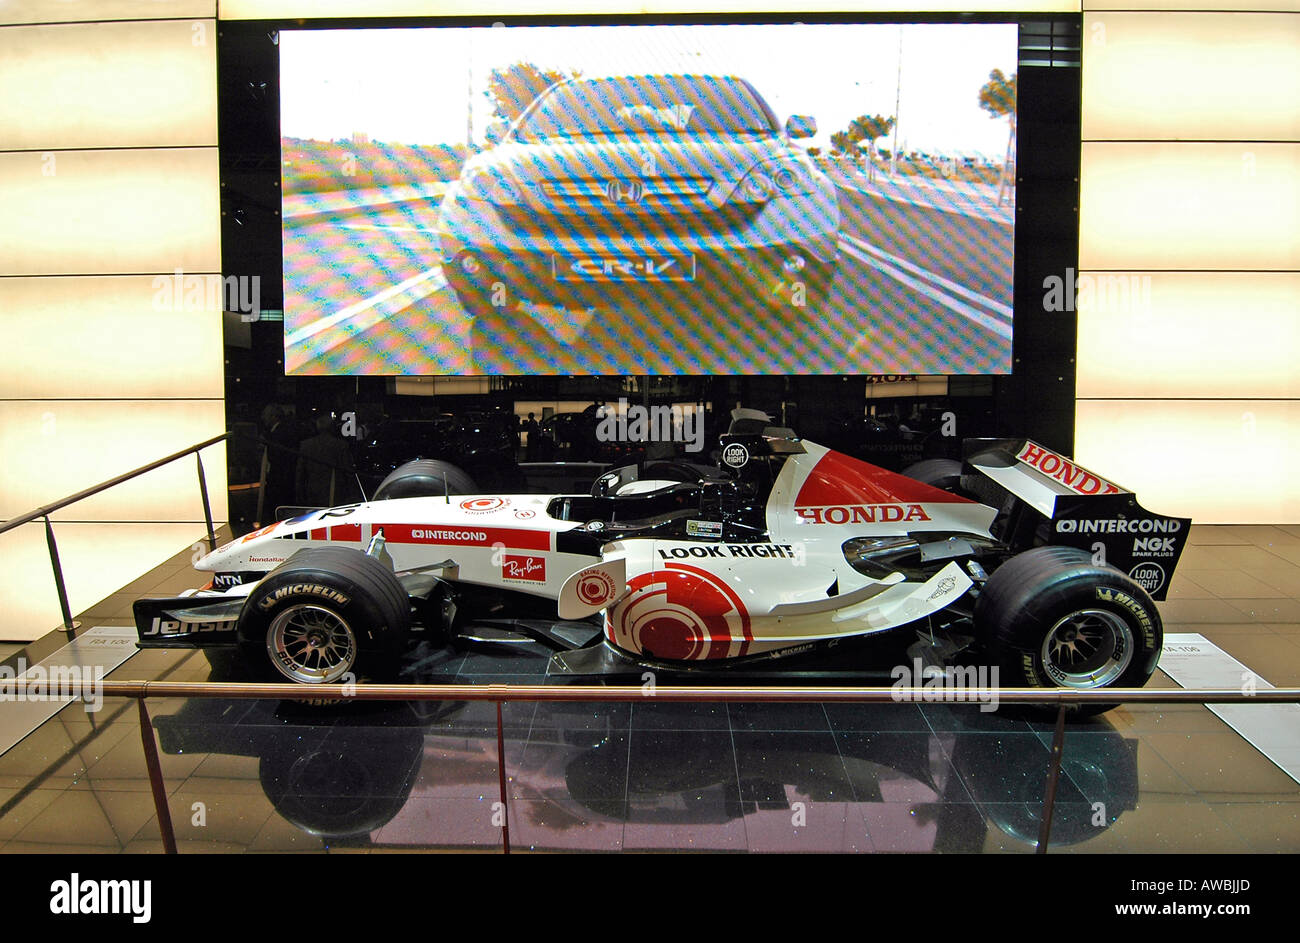 A Formula One exhibited at the Paris International Auto Show, with an advertising movie appearing on the giant screen  behind. Stock Photo